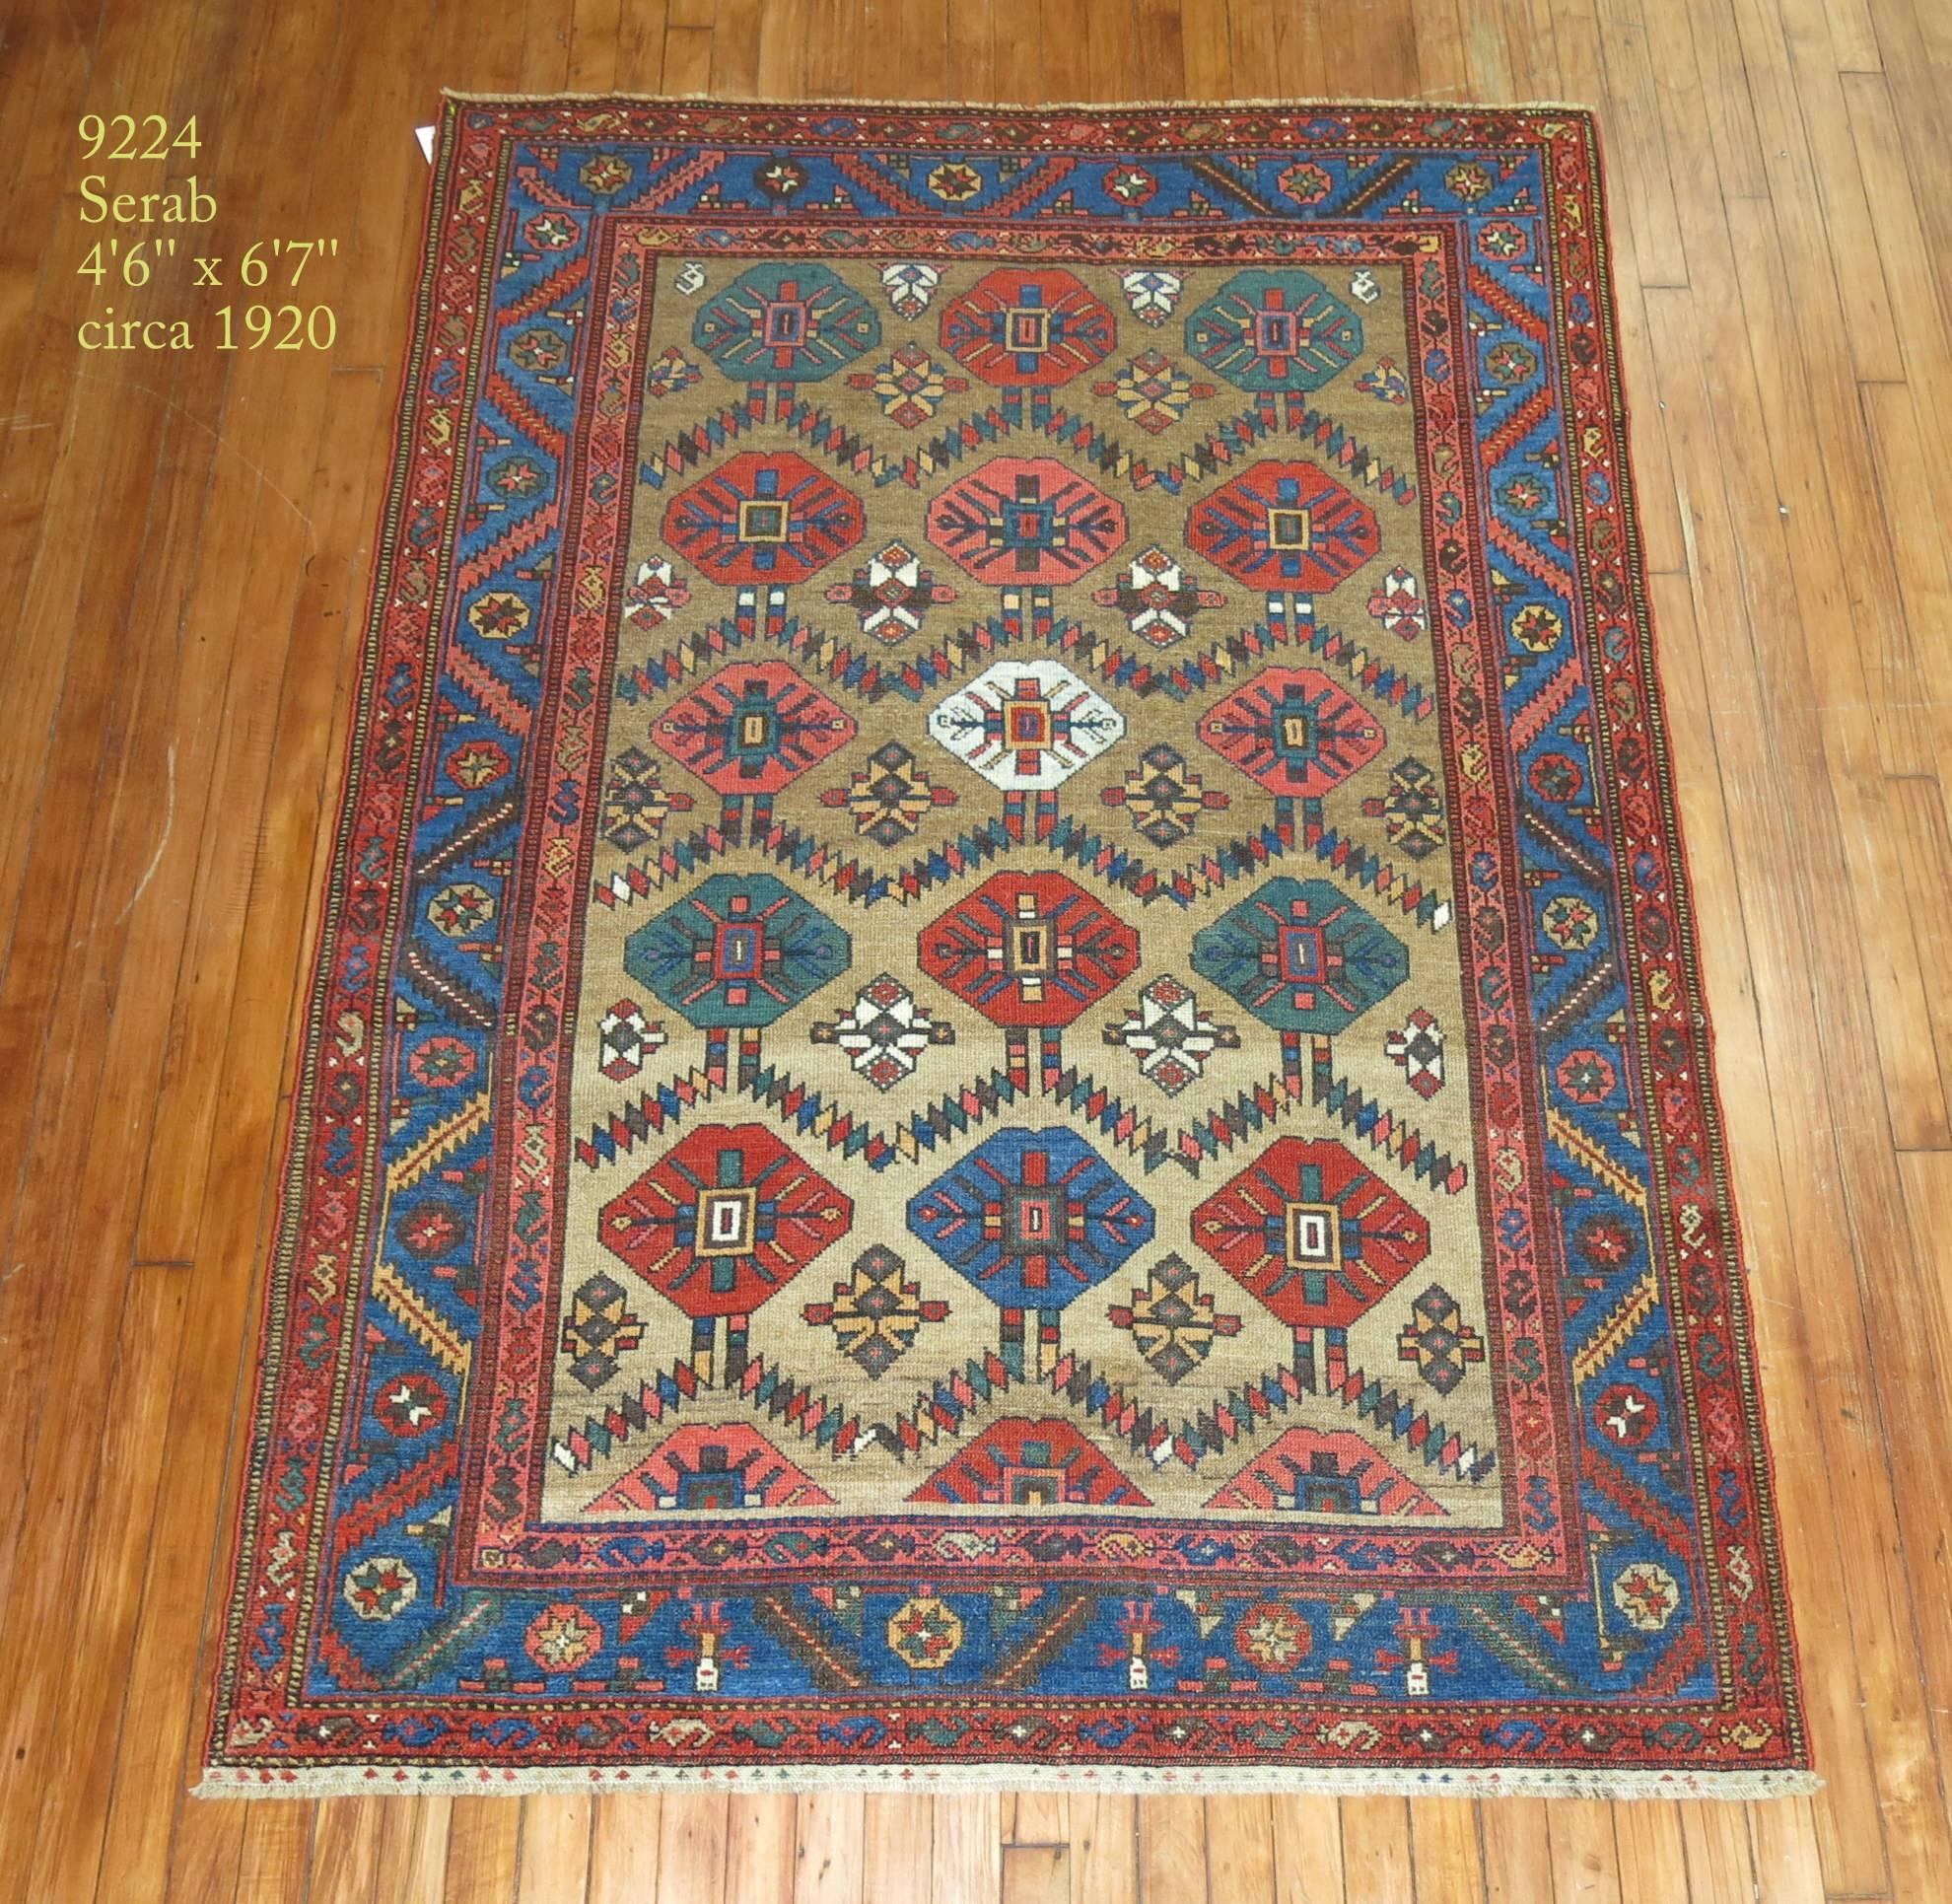 Primitive Persian Serab rug, camel colored field and light blue border highlight this great find.

Measures: 4'6'' x 6'7'' circa 1920.